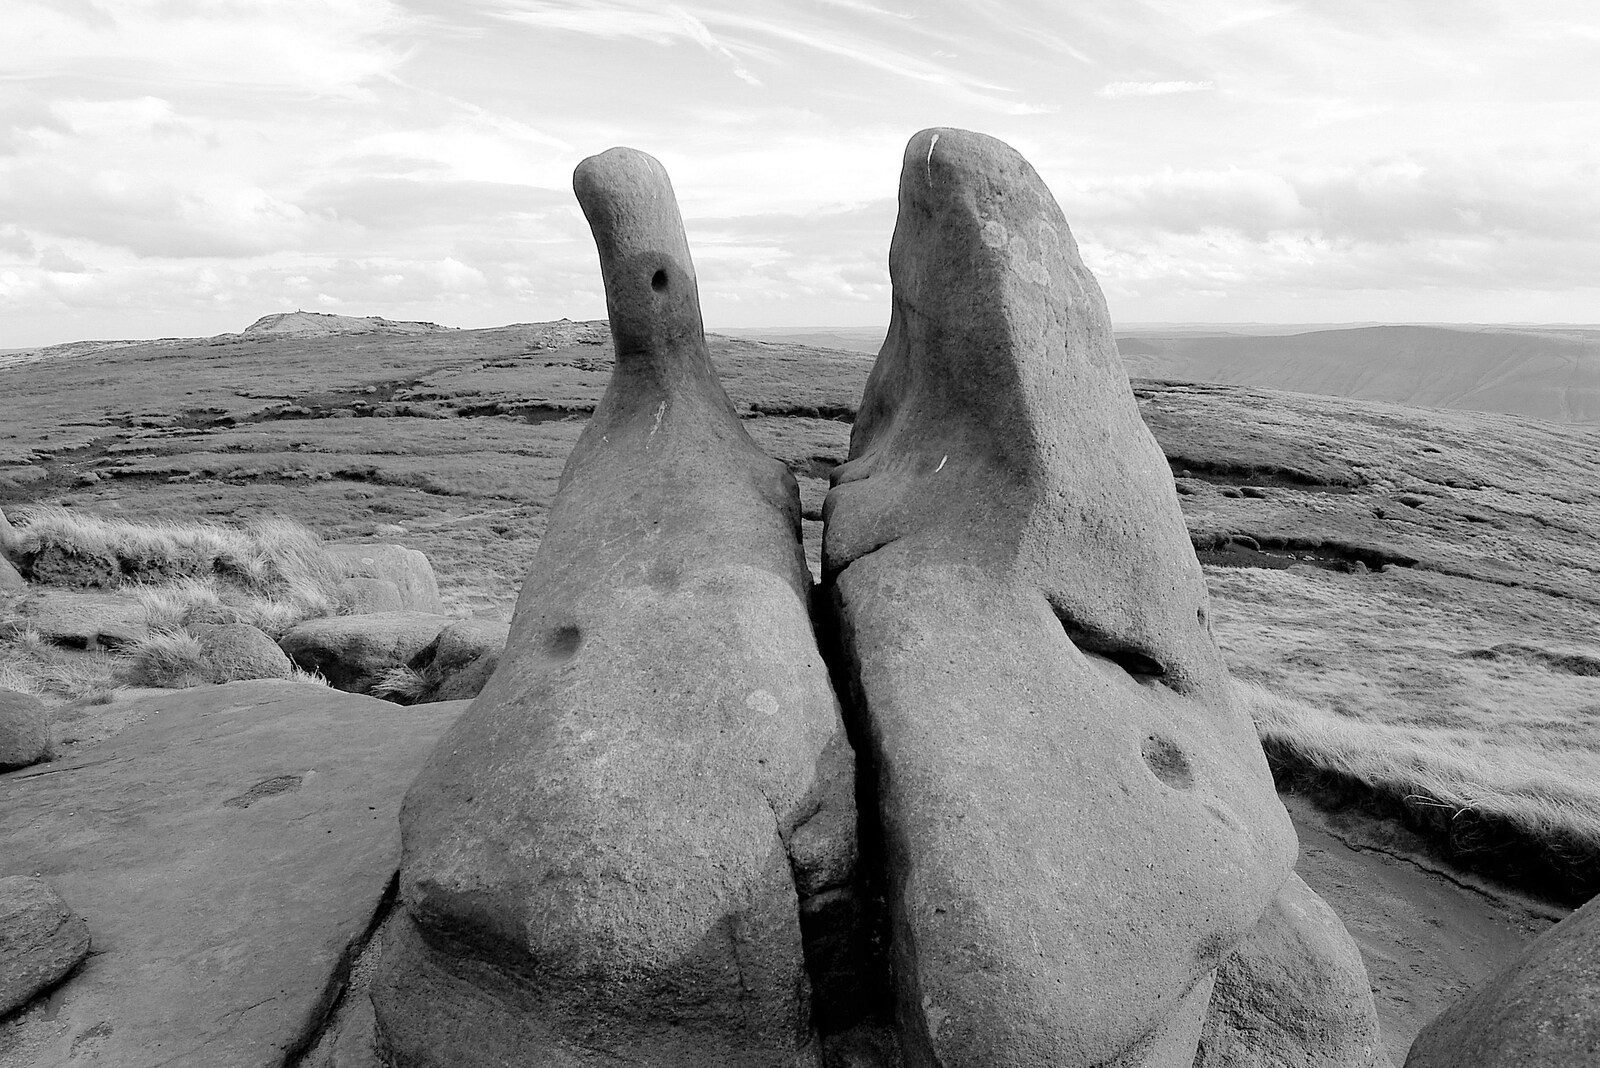 The Pennine Way: Lost on Kinder Scout, Derbyshire - 9th October 2005: A curious pair of wind-carved uprights